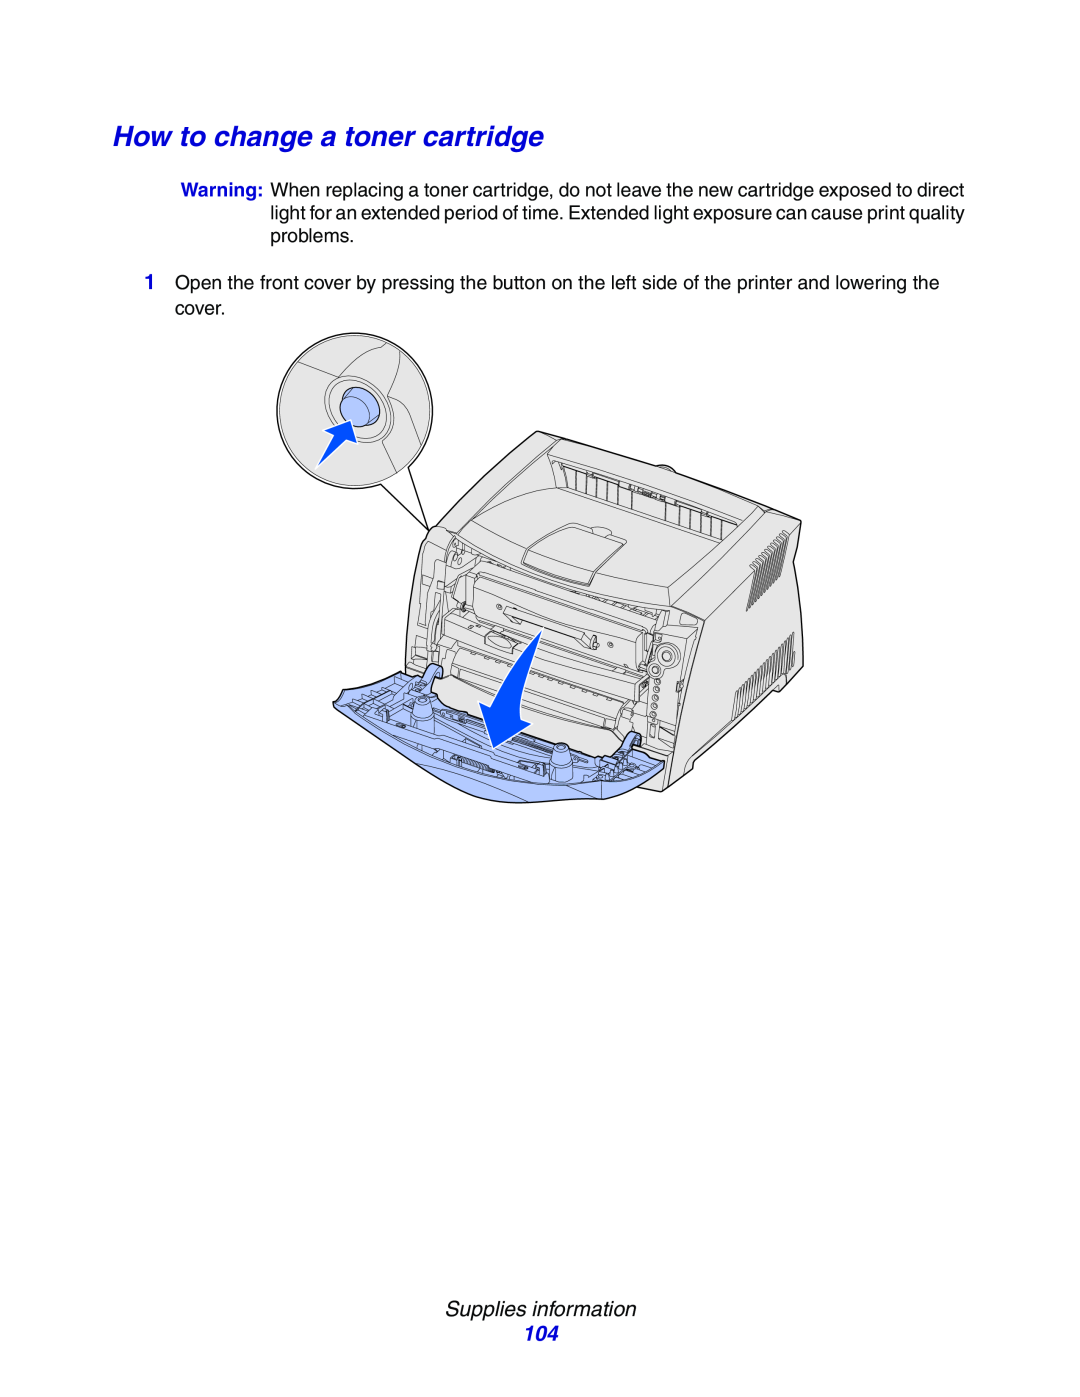 Lexmark E234N manual How to change a toner cartridge, Supplies information 